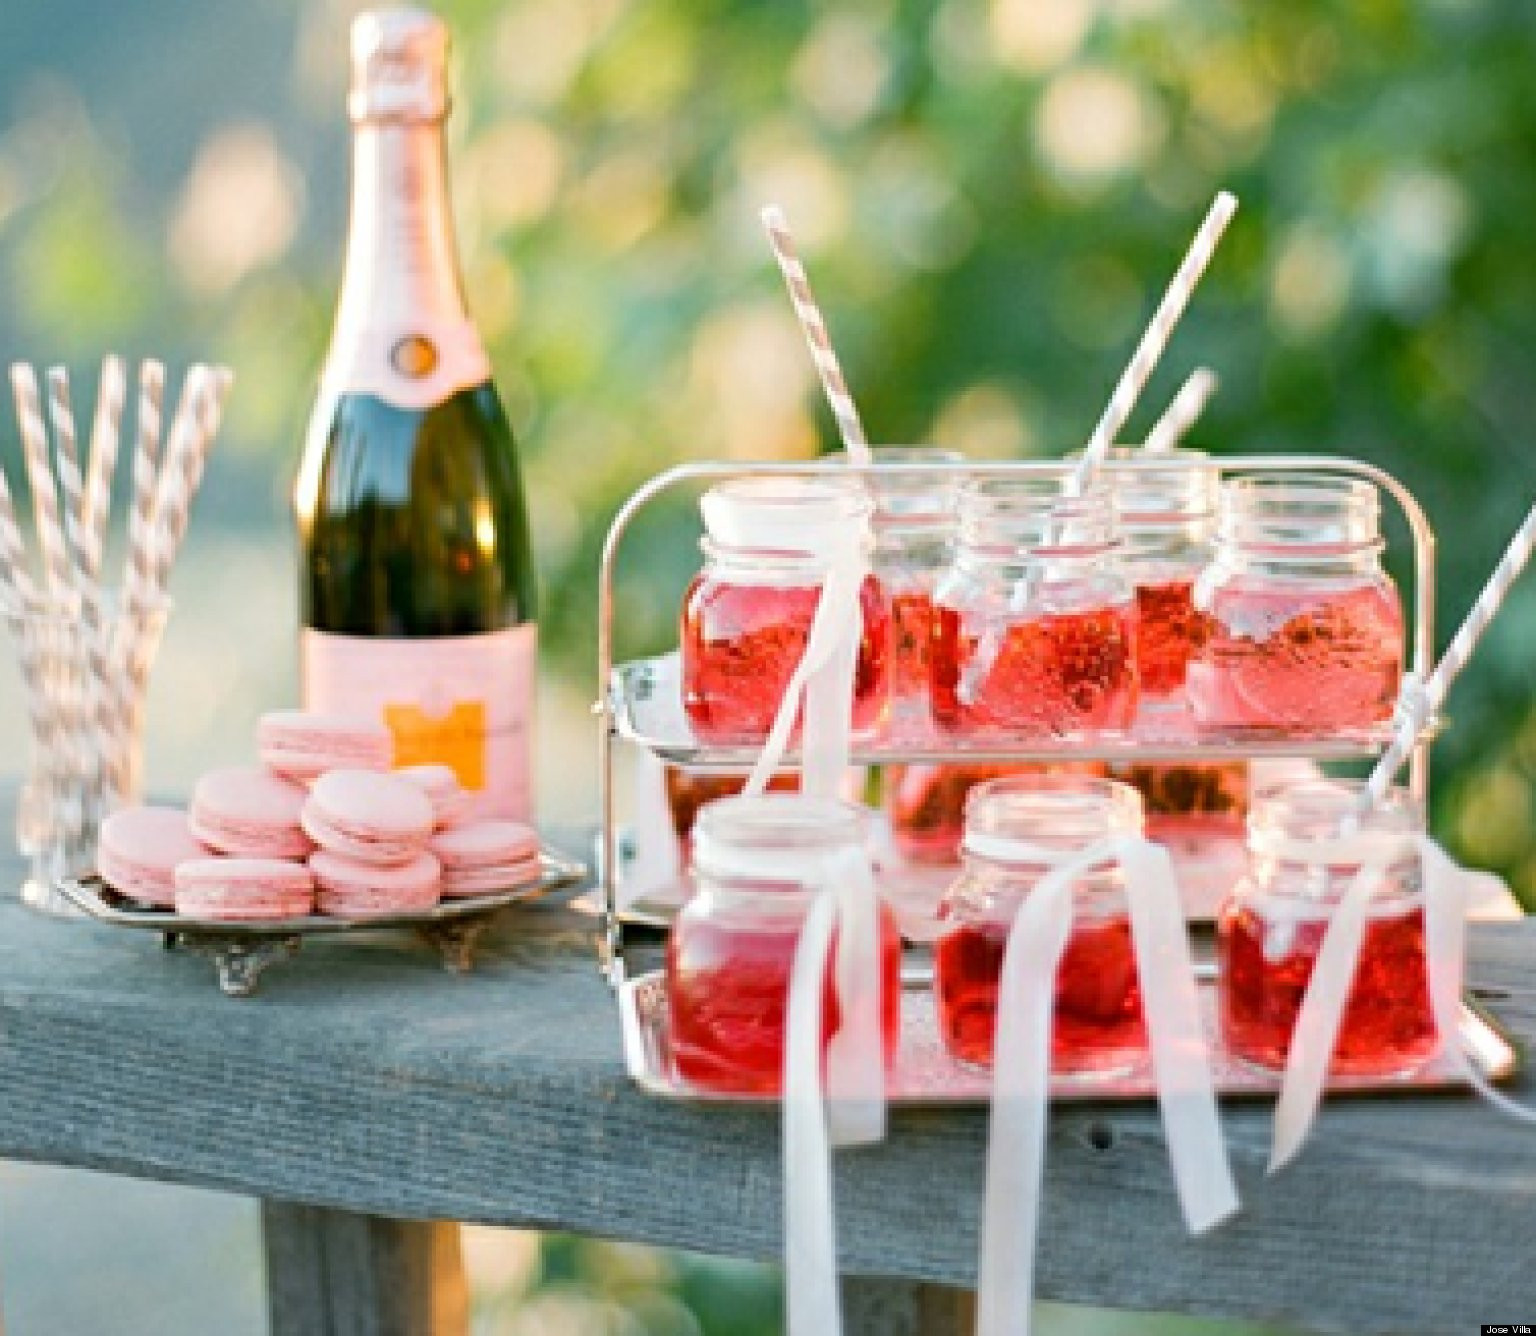 Garden Party Food And Drink Ideas
 4 Ways to Modernize the Traditional Wedding Shower